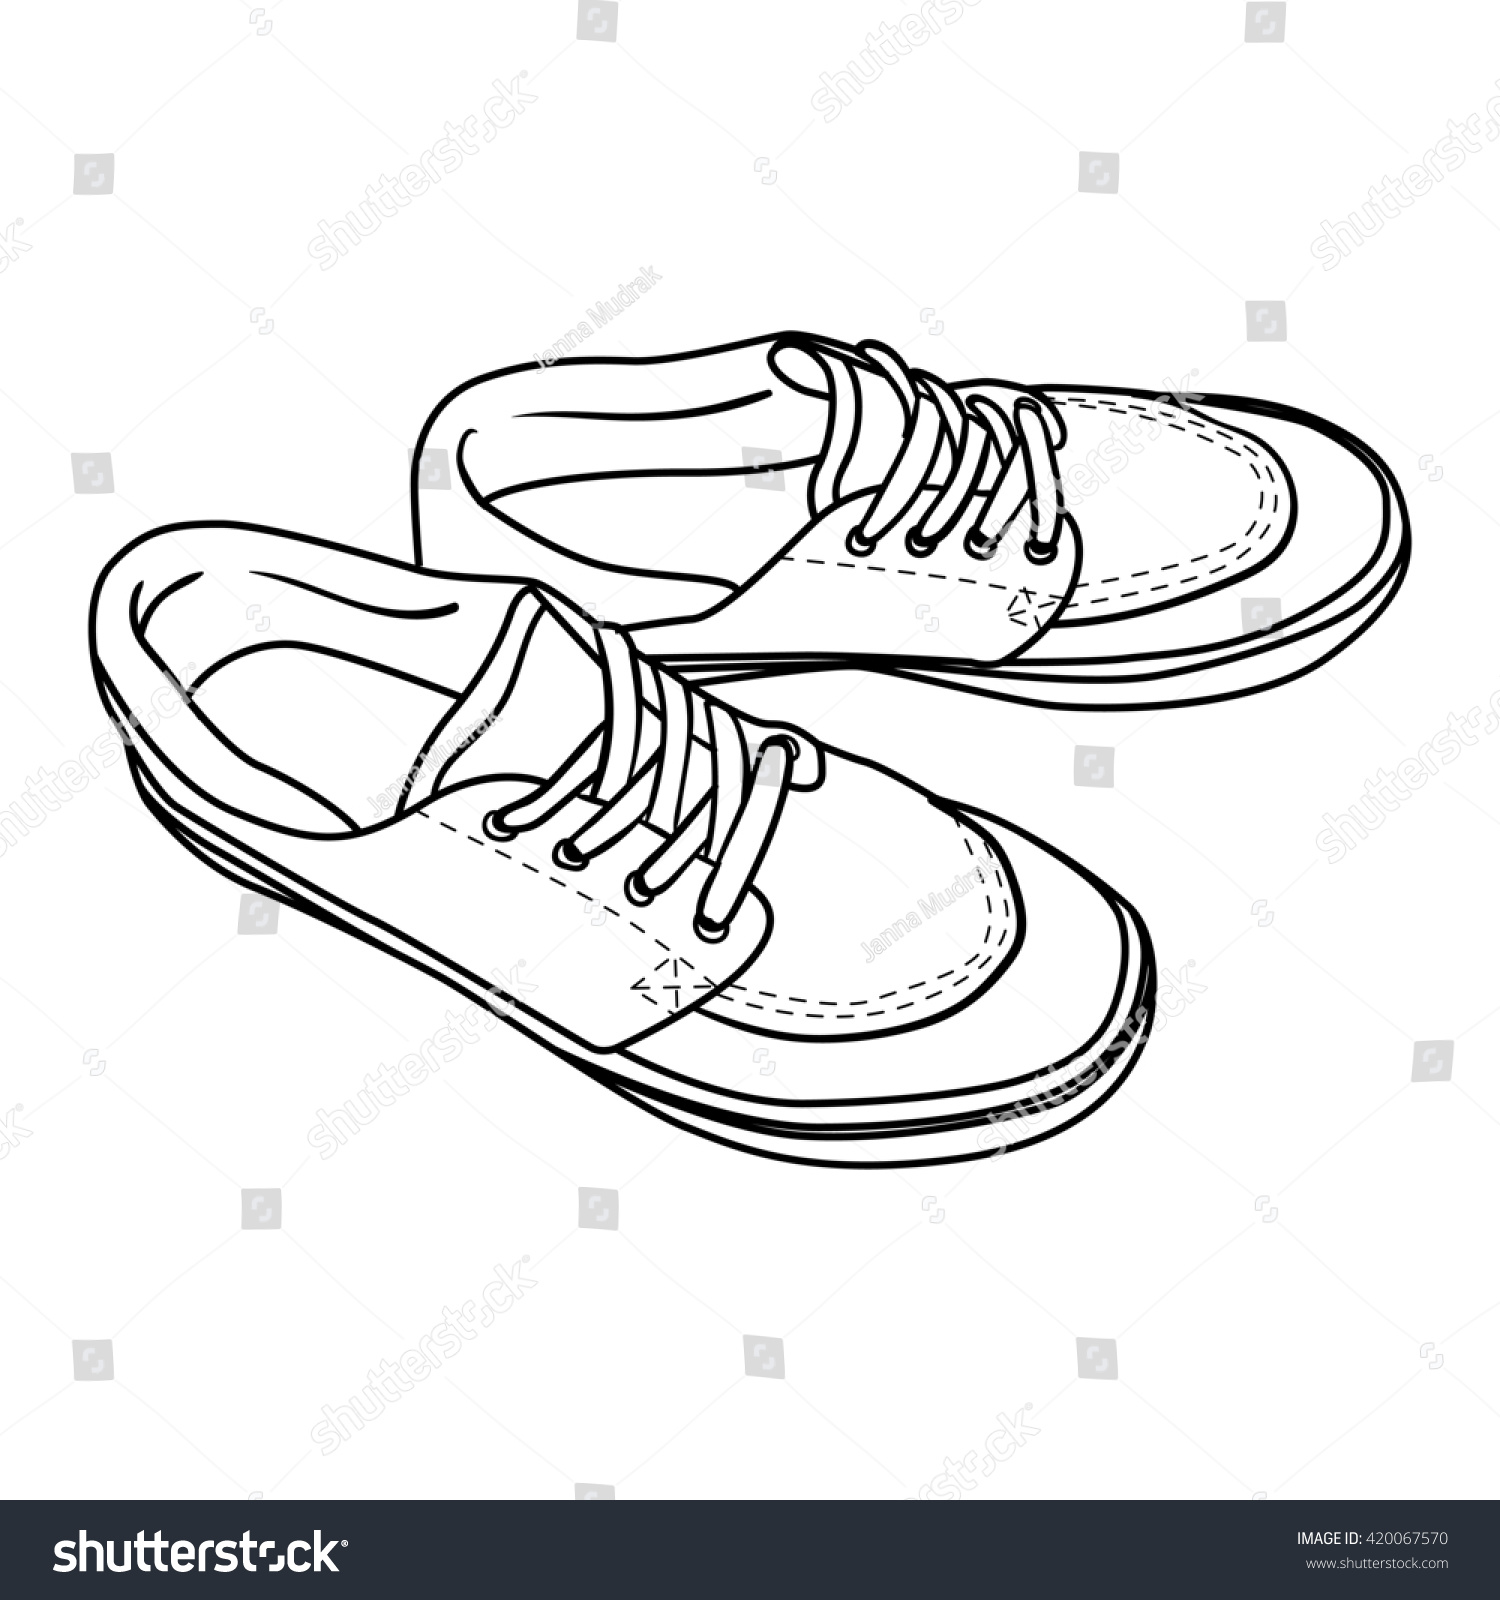 contour doodle shoes. cartoon gumshoes isolated - Royalty Free Stock ...